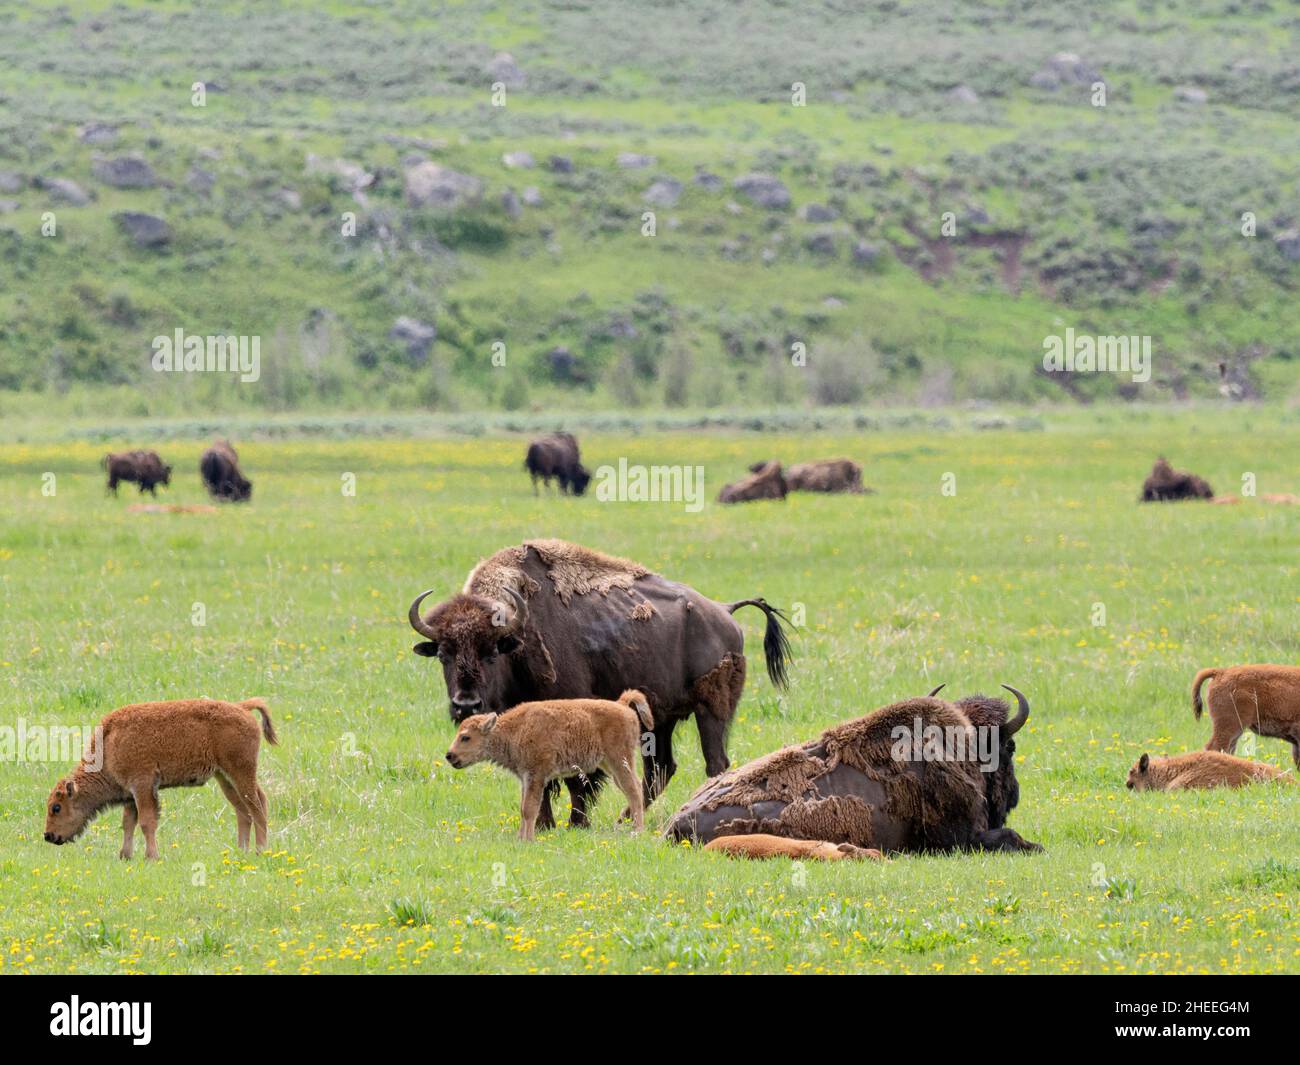 Adult bison, Bison bison, with young grazing in Lamar Valley, Yellowstone National Park, Wyoming. Stock Photo